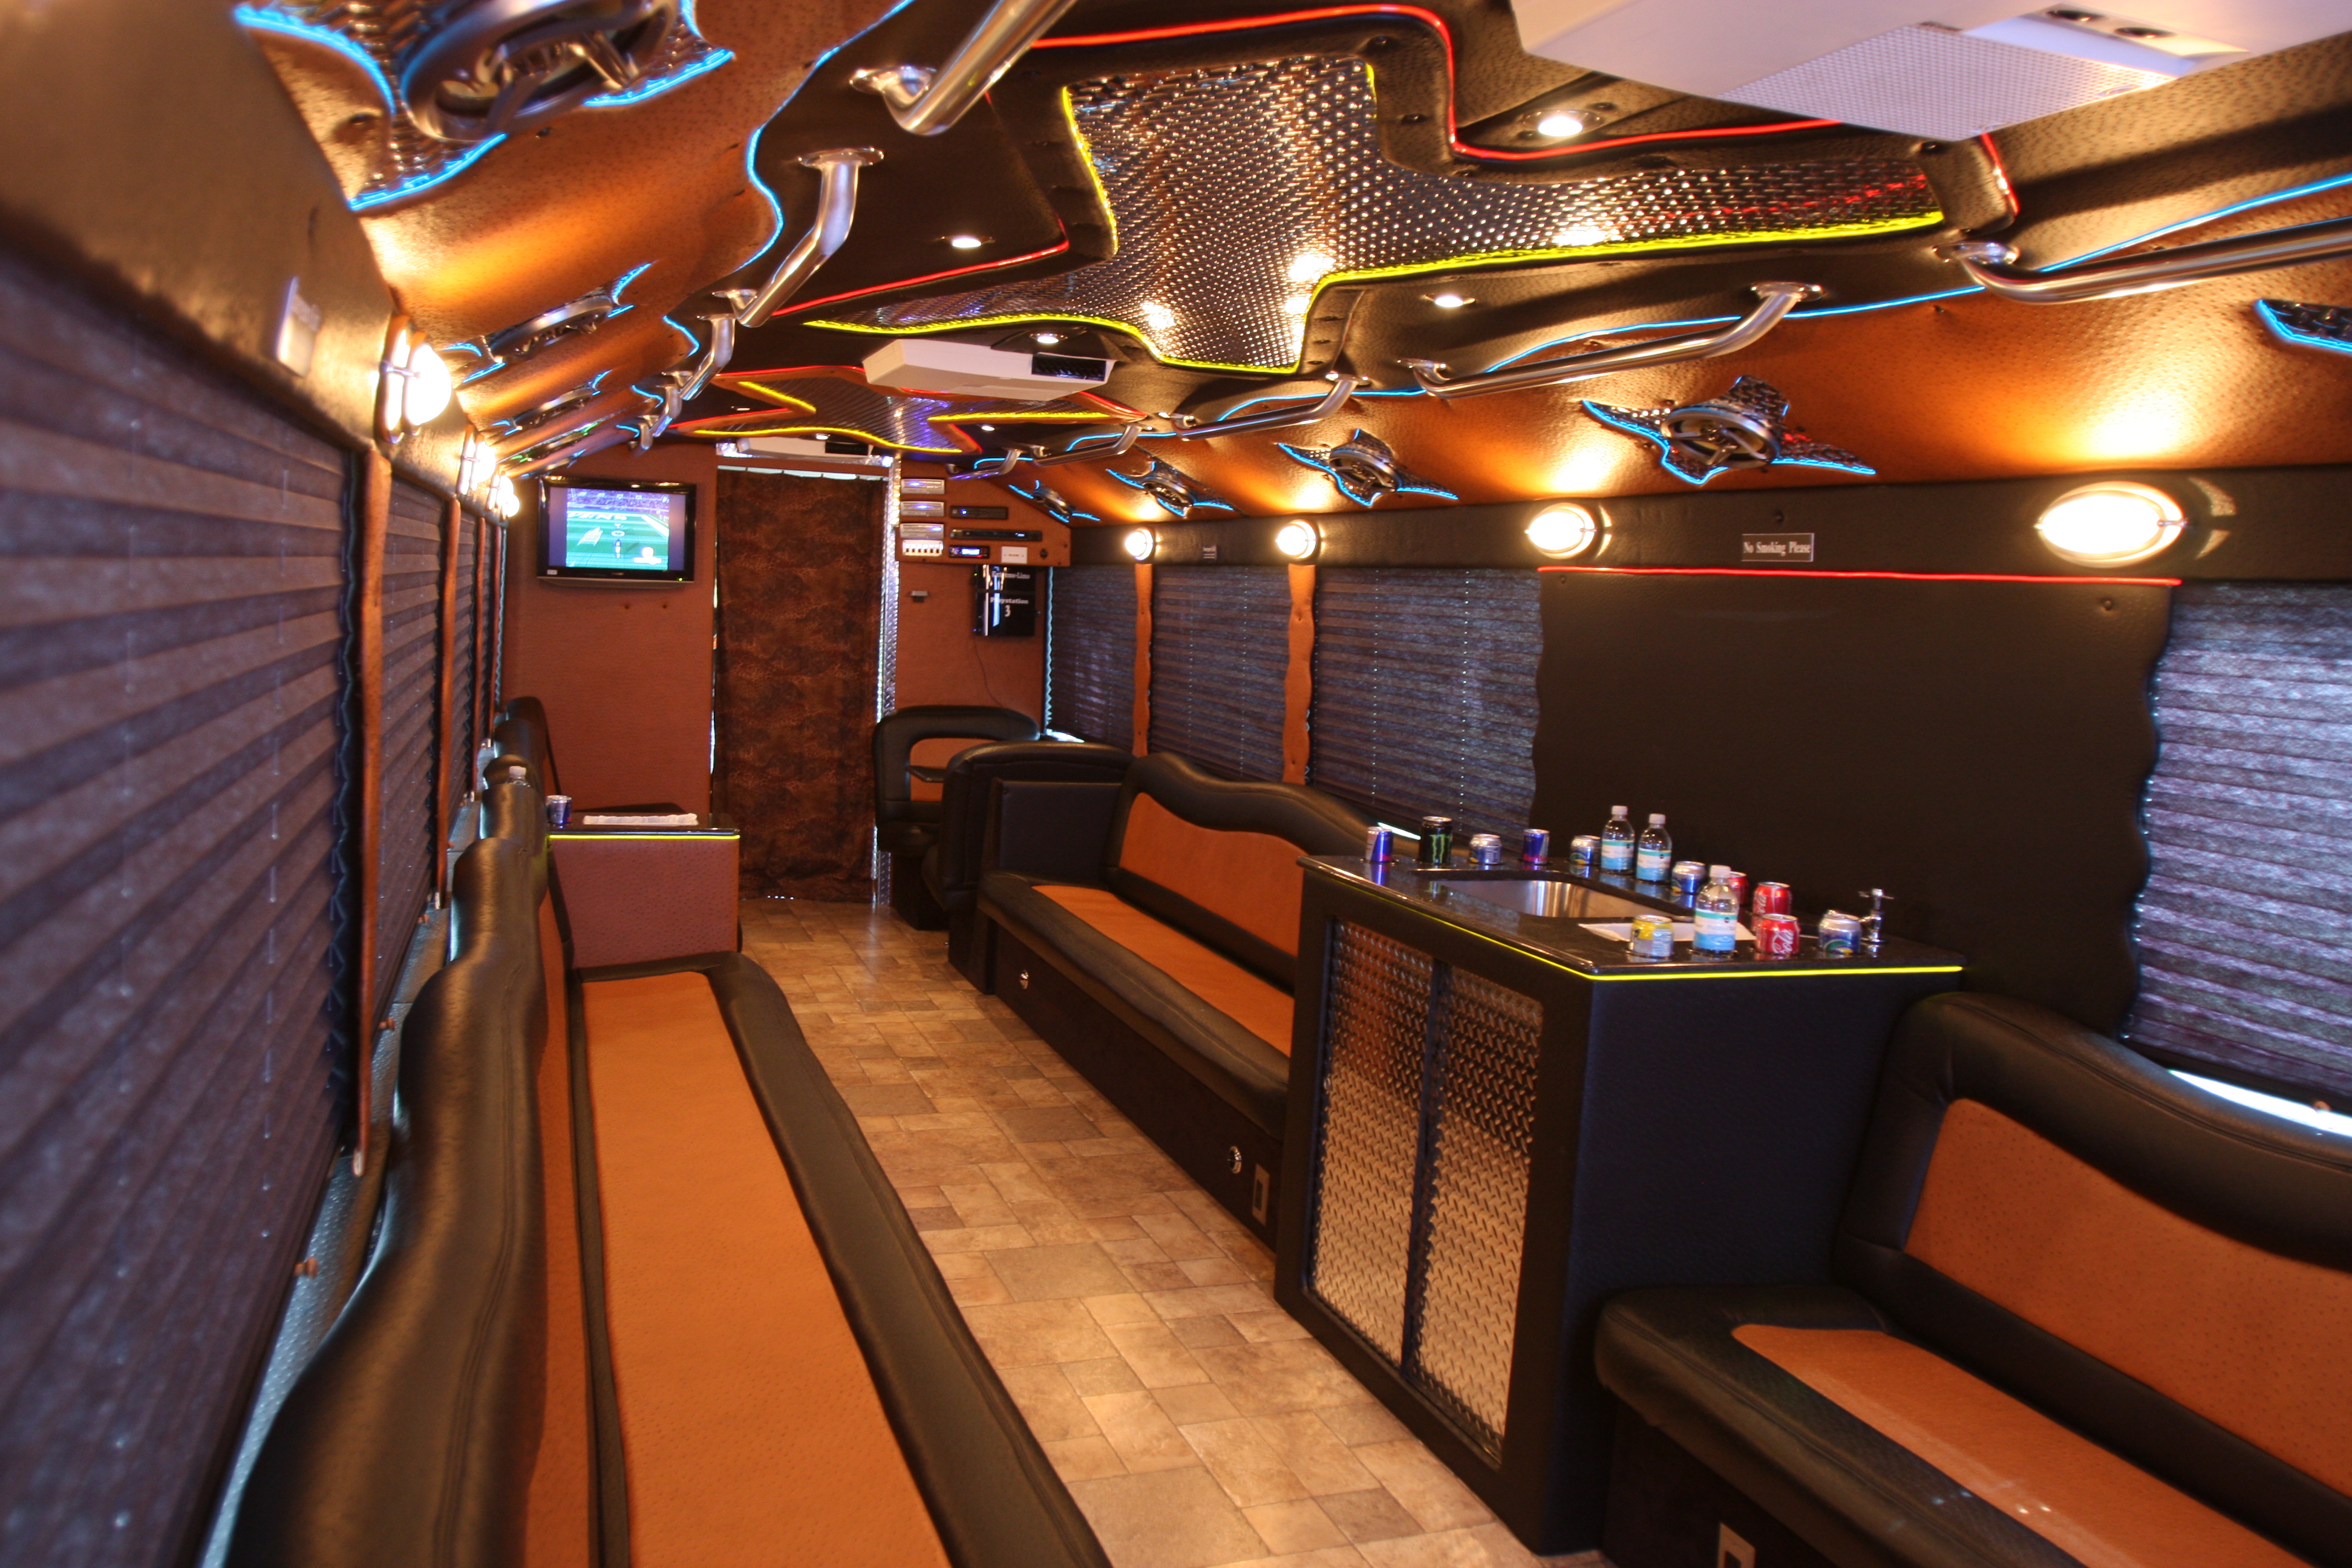 Rockstar Party Bus Limo Clean Ride Limo